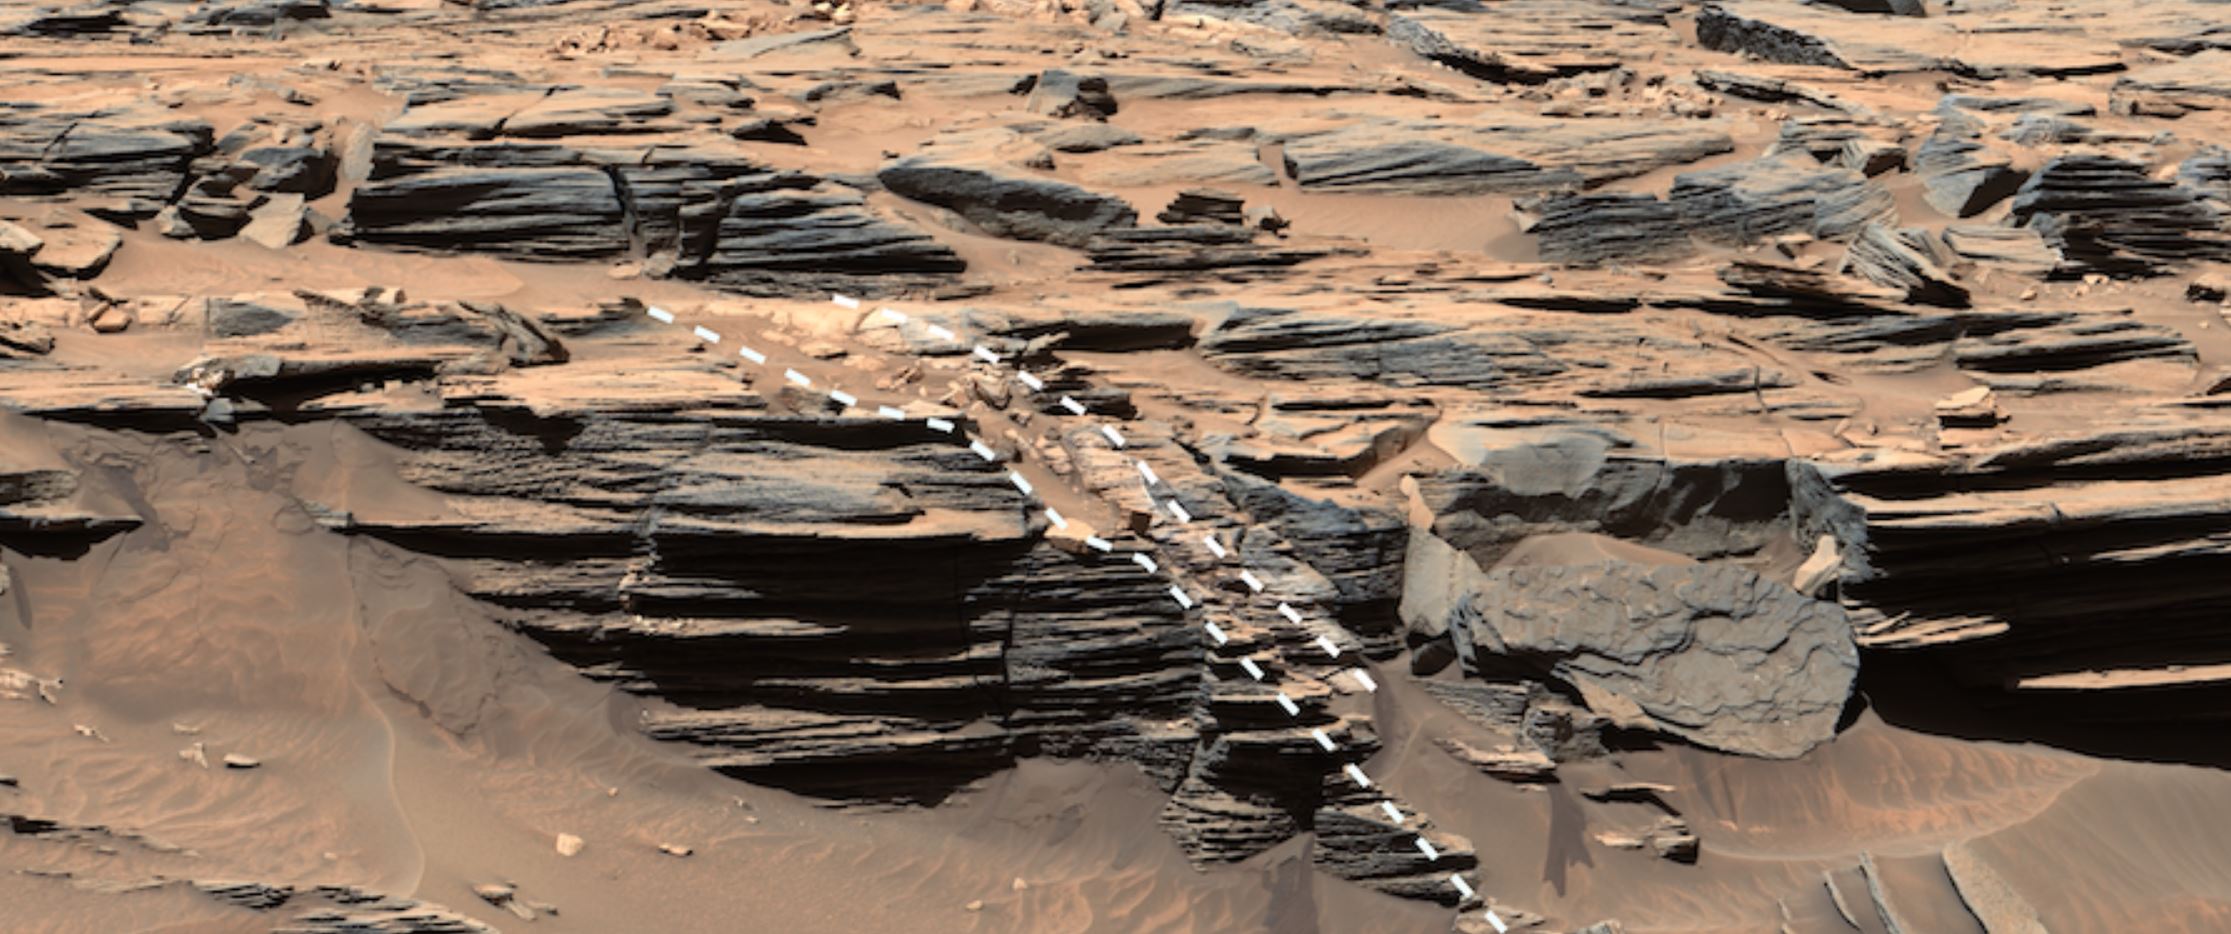 Strange surface features on Mars. Malin Space Science Systems/NASA/JPL-Caltech